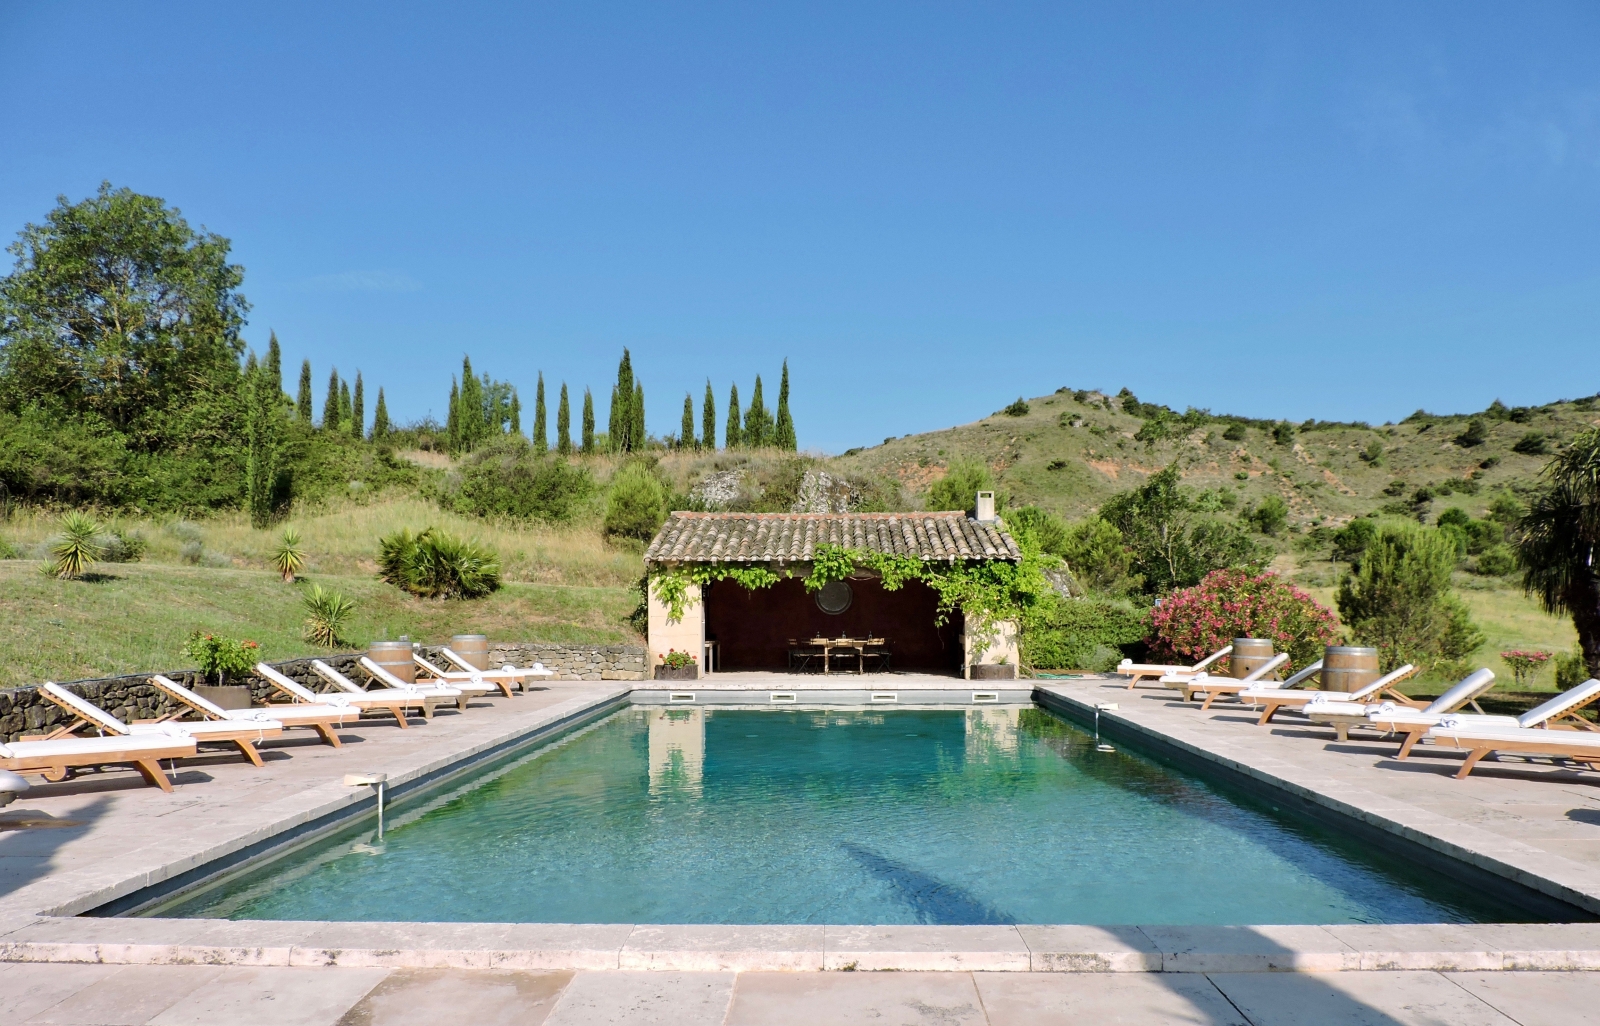 Pool and patio area with sun loungers and covered dining area at Domaine de Corbieres in South West France